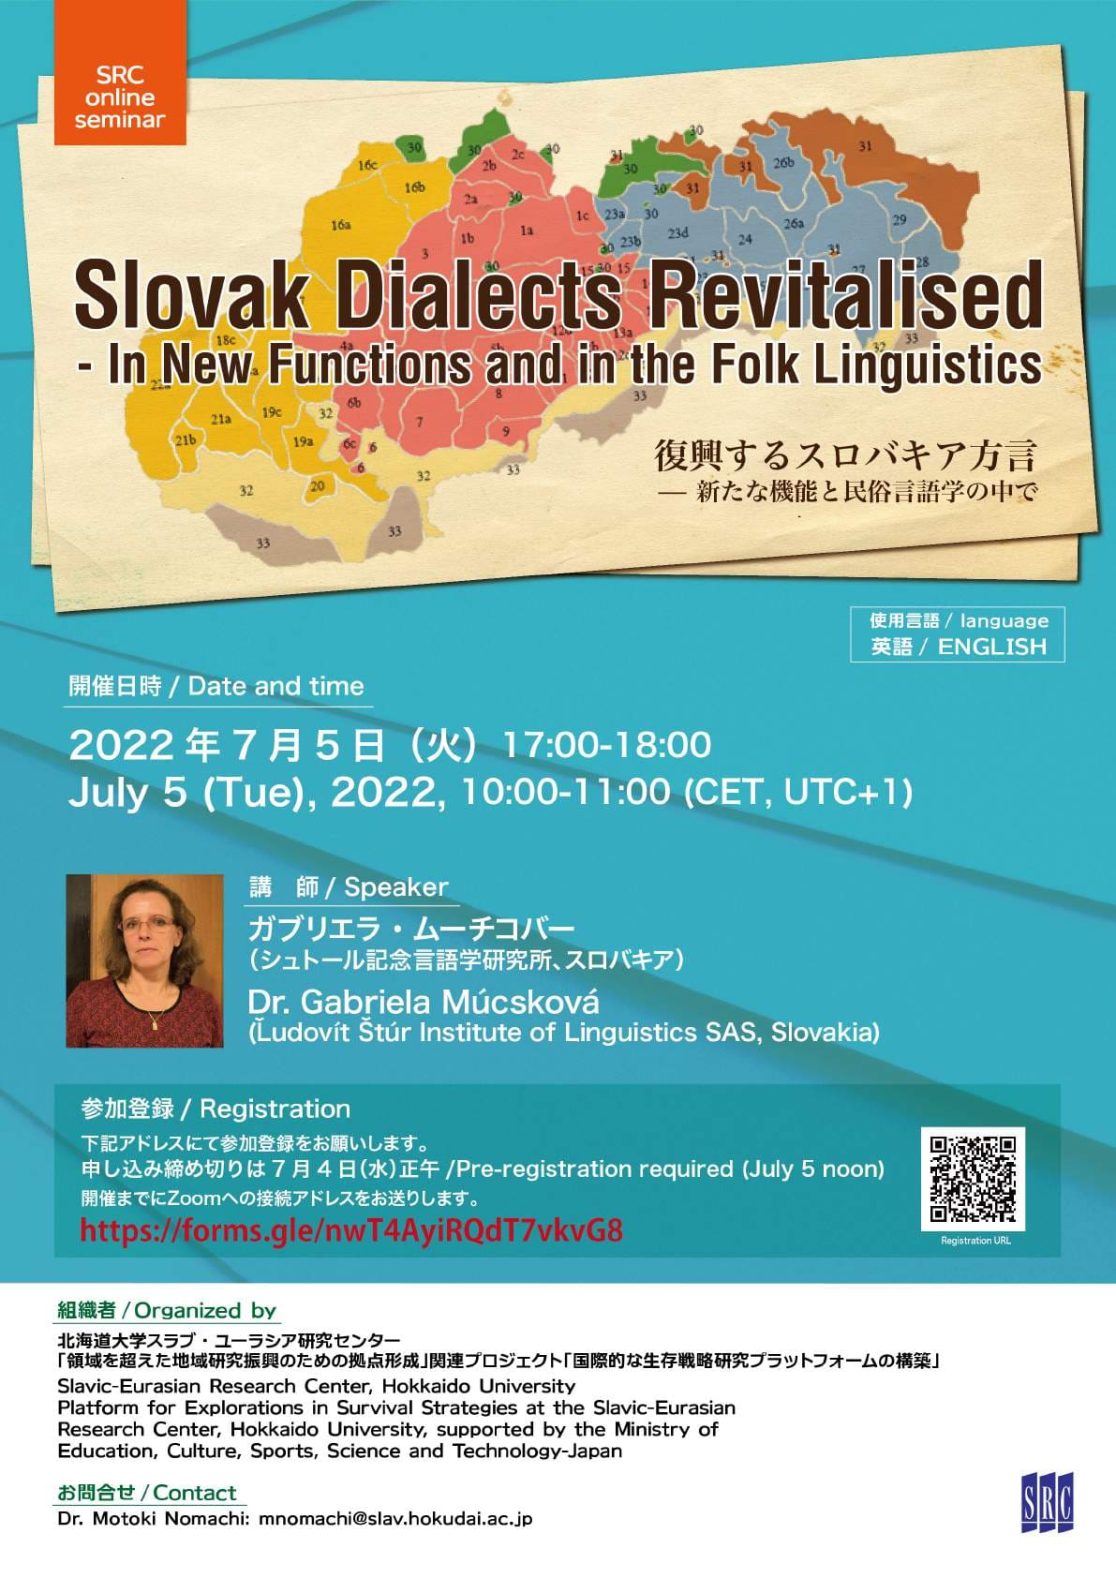 SRC Seminar ” Slovak Dialects Revitalised - In New Functions and in the Folk Linguistics”